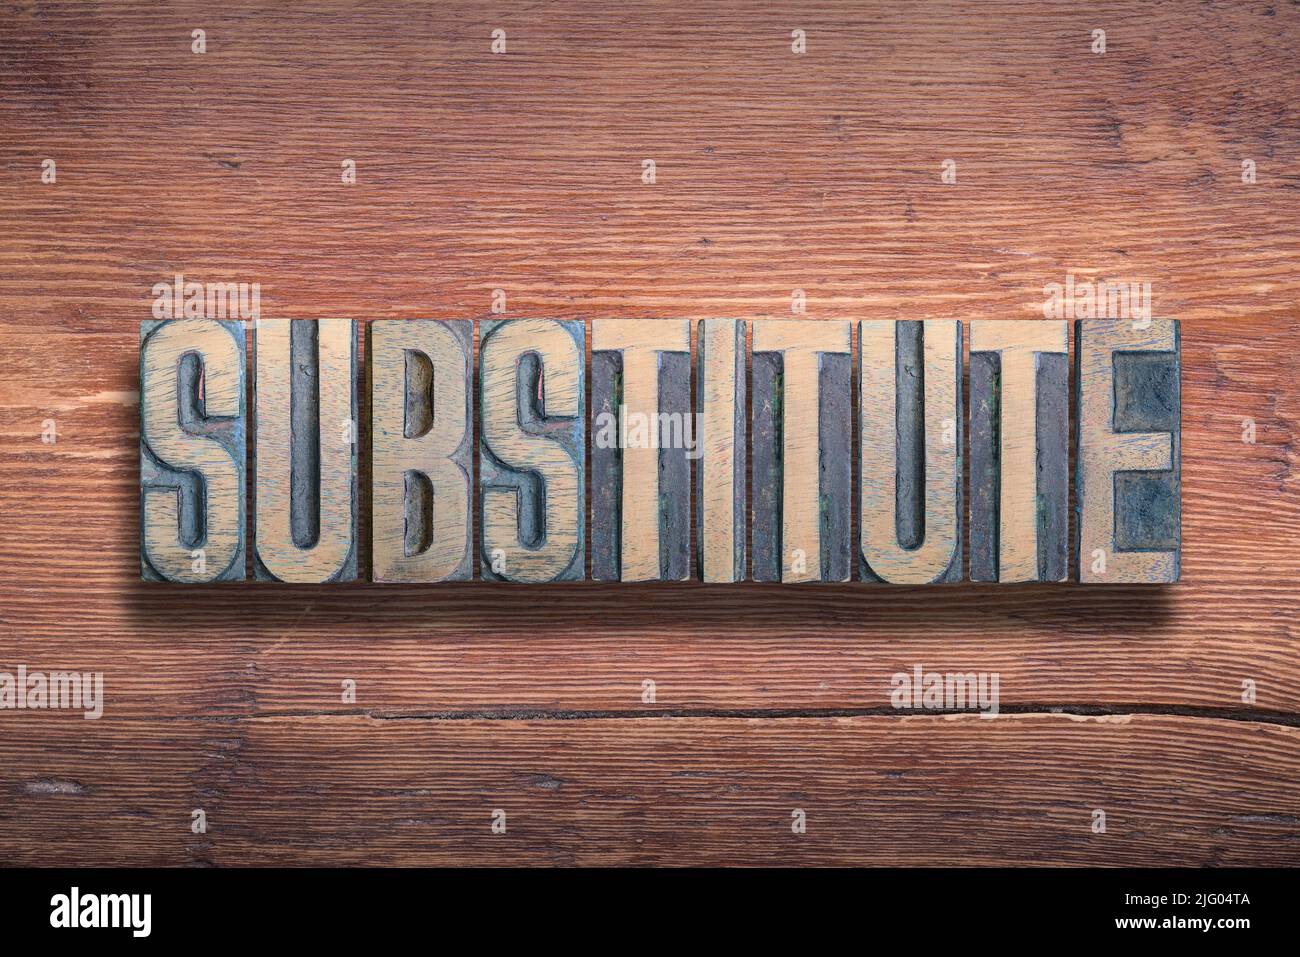 substitute word combined on vintage varnished wooden surface Stock Photo